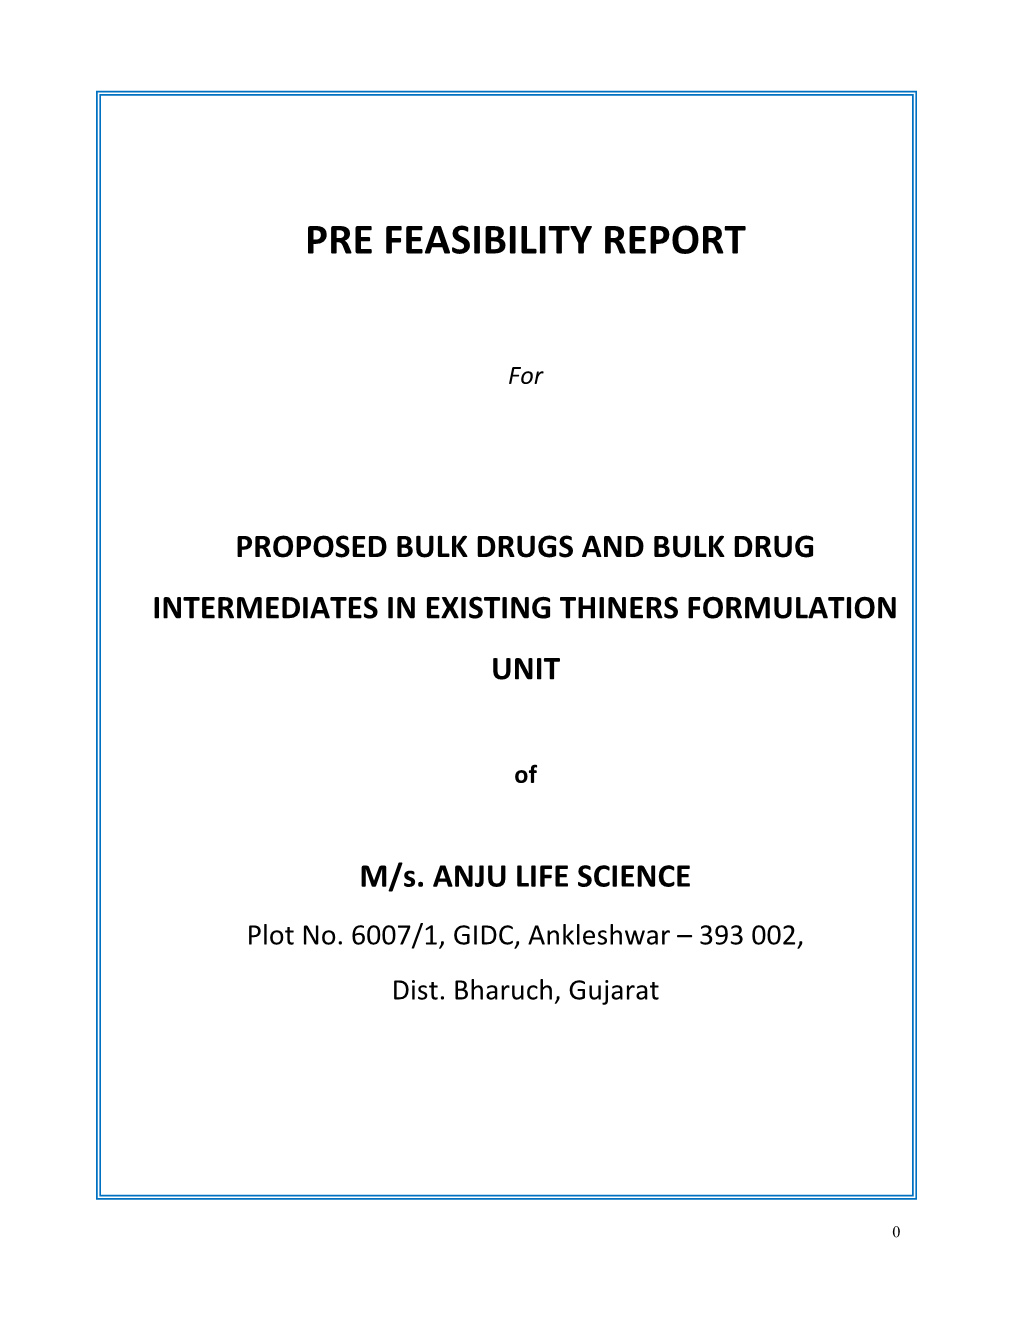 Project Feasibility Report